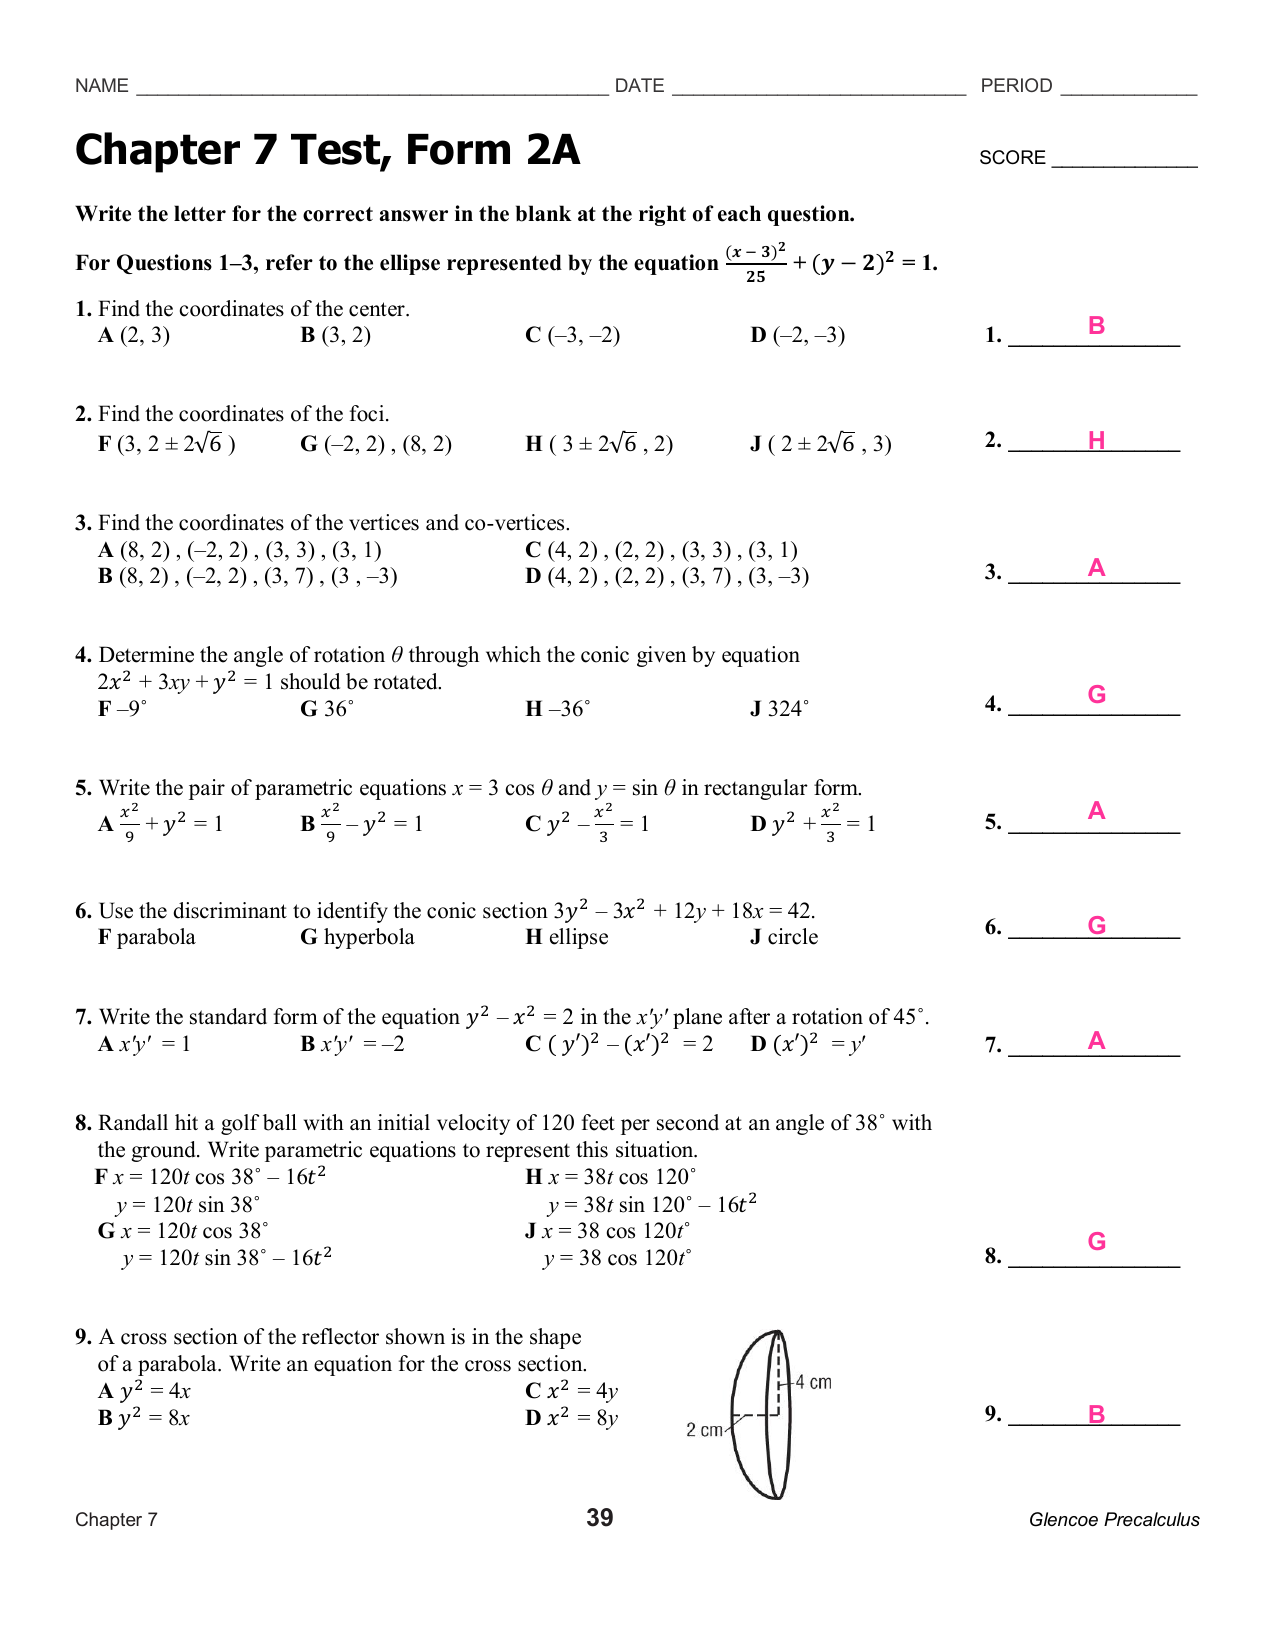 Ch7 Test 2A ANSWERS